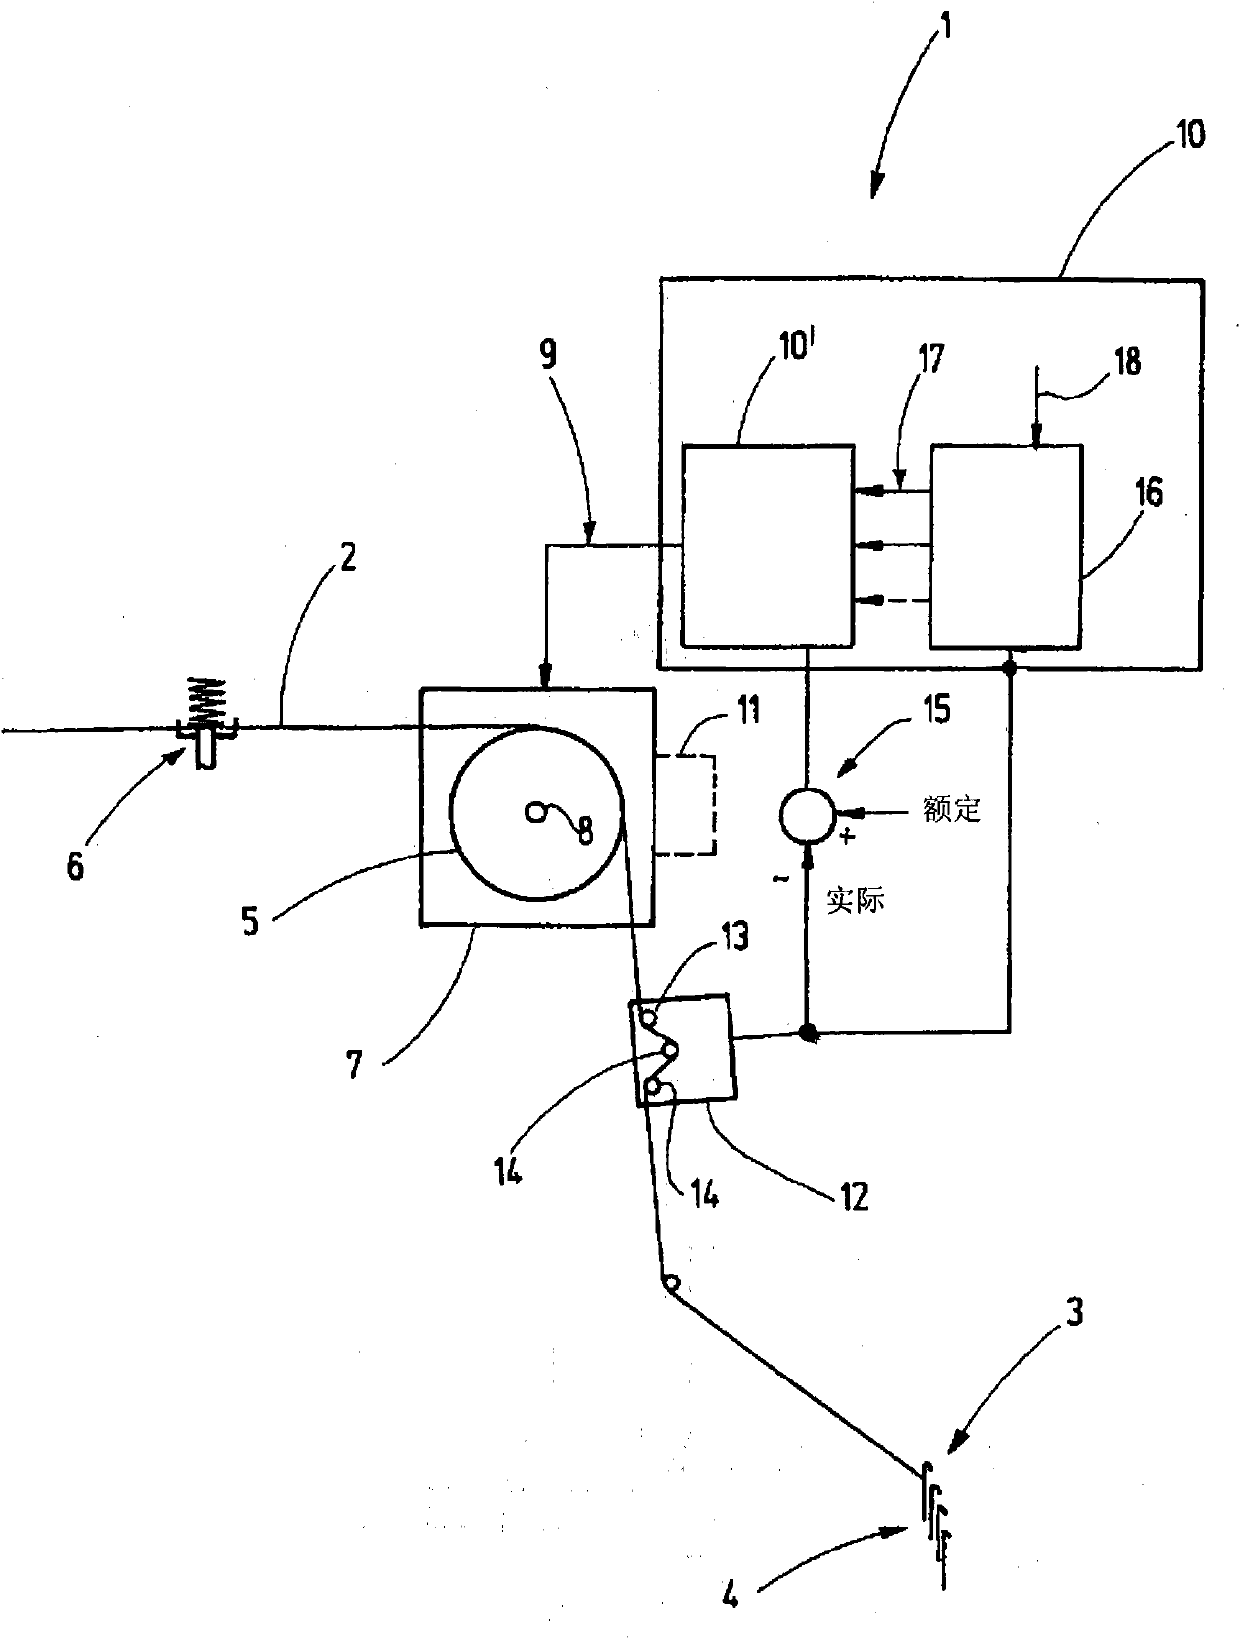 Thread delivery device with an adaptive regulator